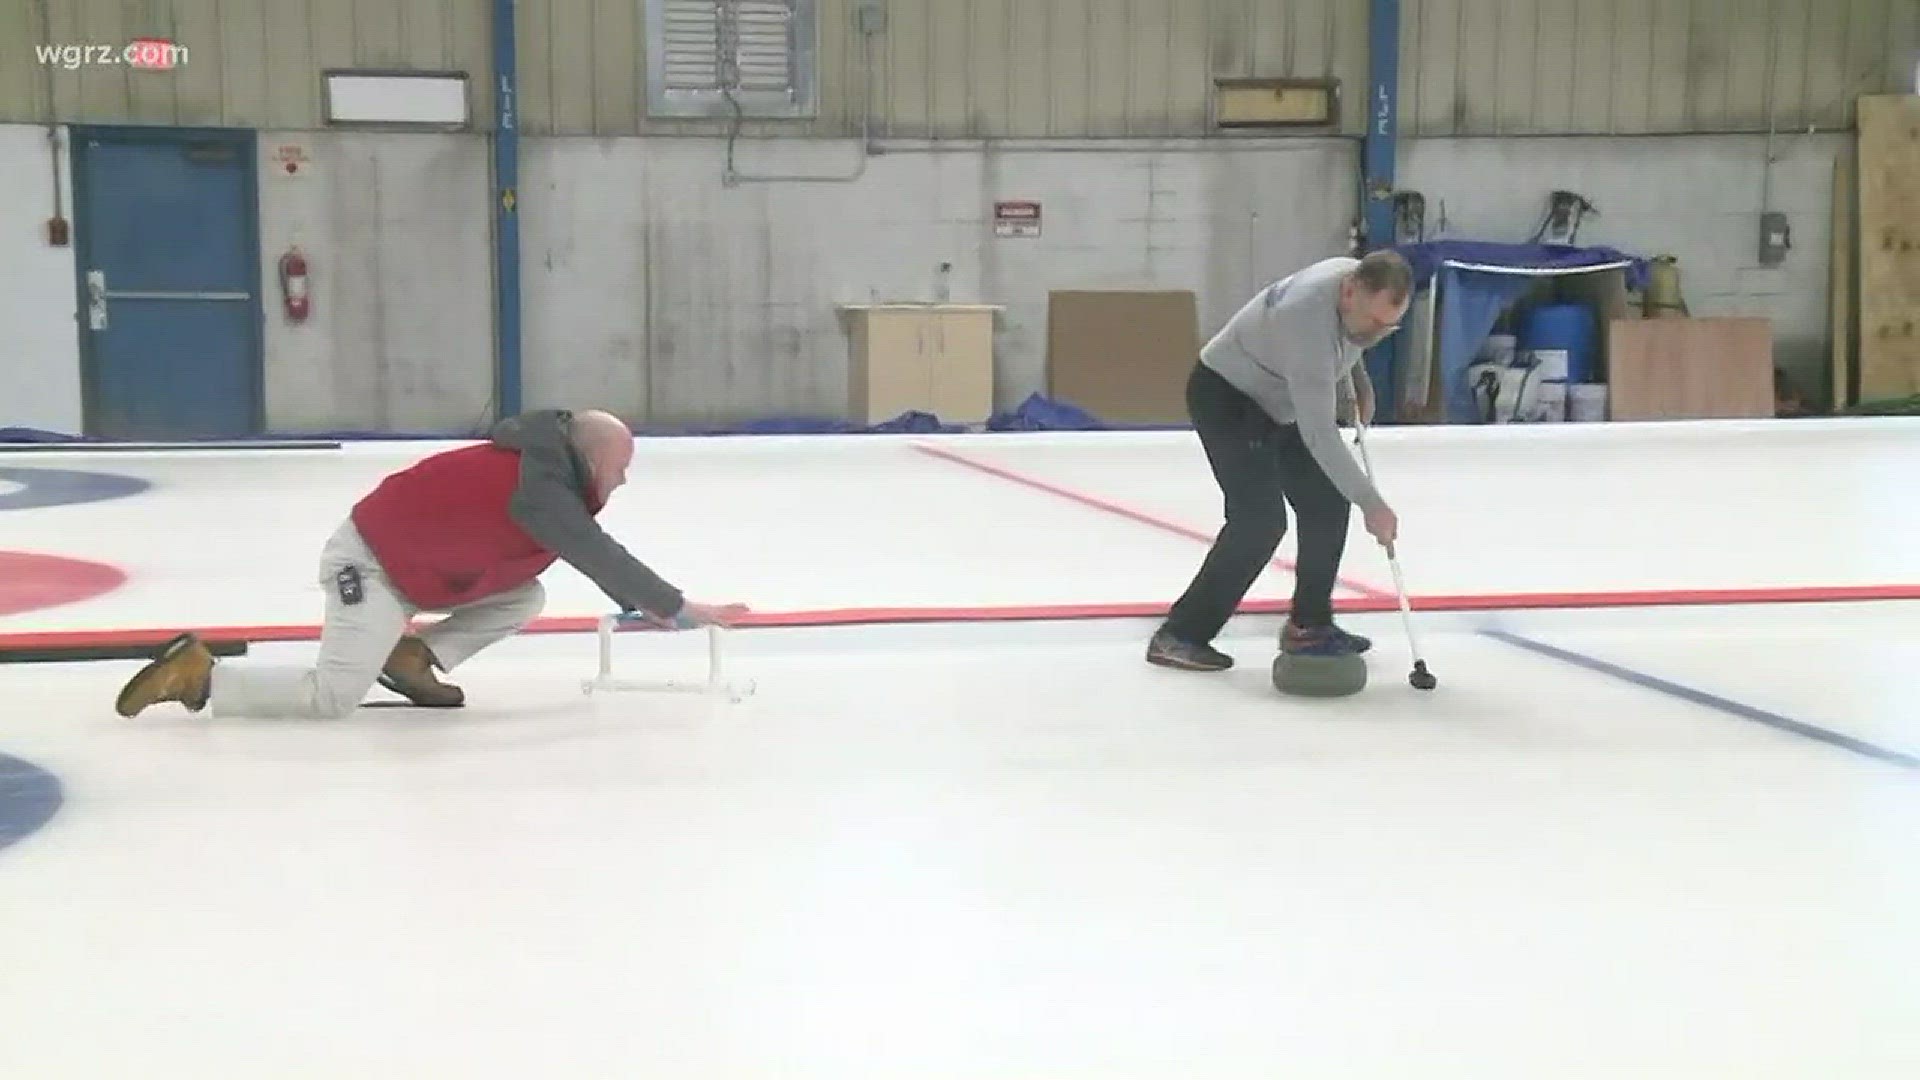 Daybreak's Joshua Robinson takes his first shot at curling as part of the Buffalo Curling Club's Open House, to kick off it's new indoor facility in South Buffalo